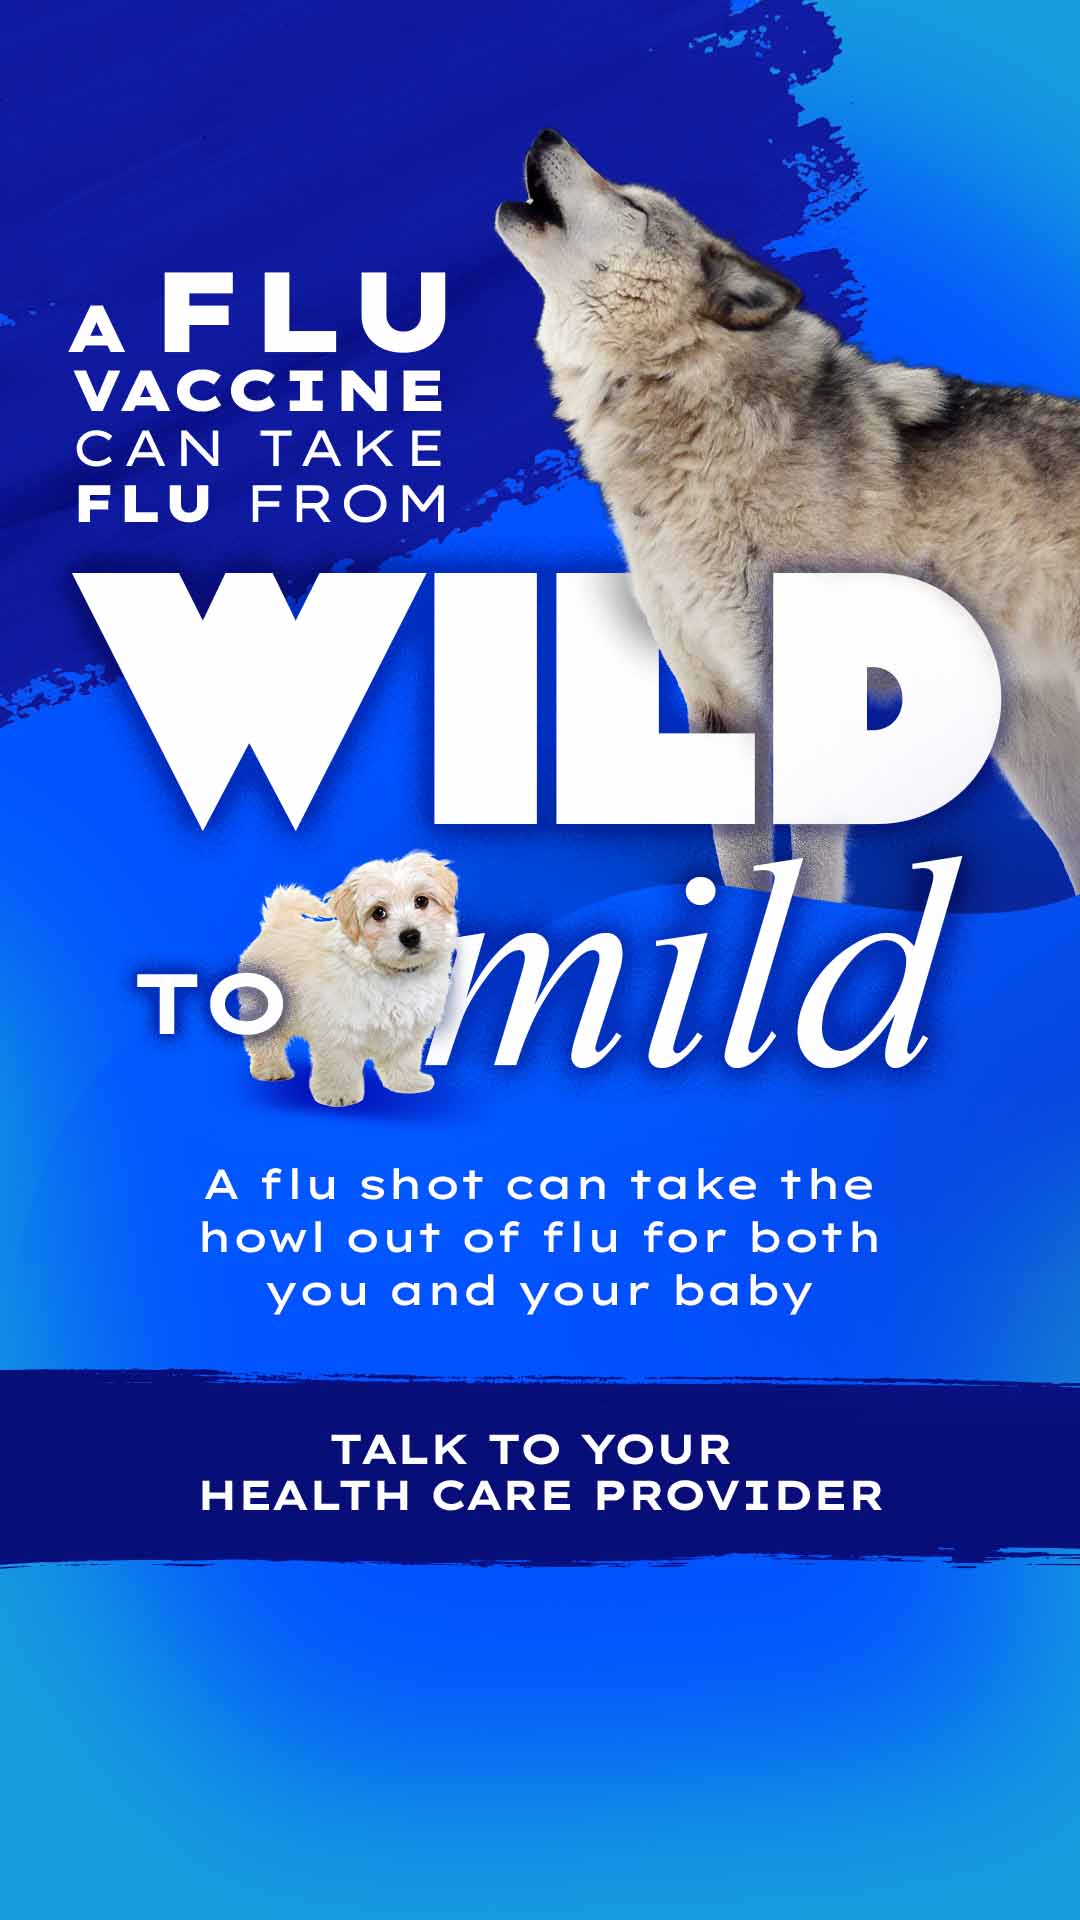 A flu vaccine can take flu form wild to mild A flu shot can take the howl out of flu for both you and your baby Talk to your health care provider